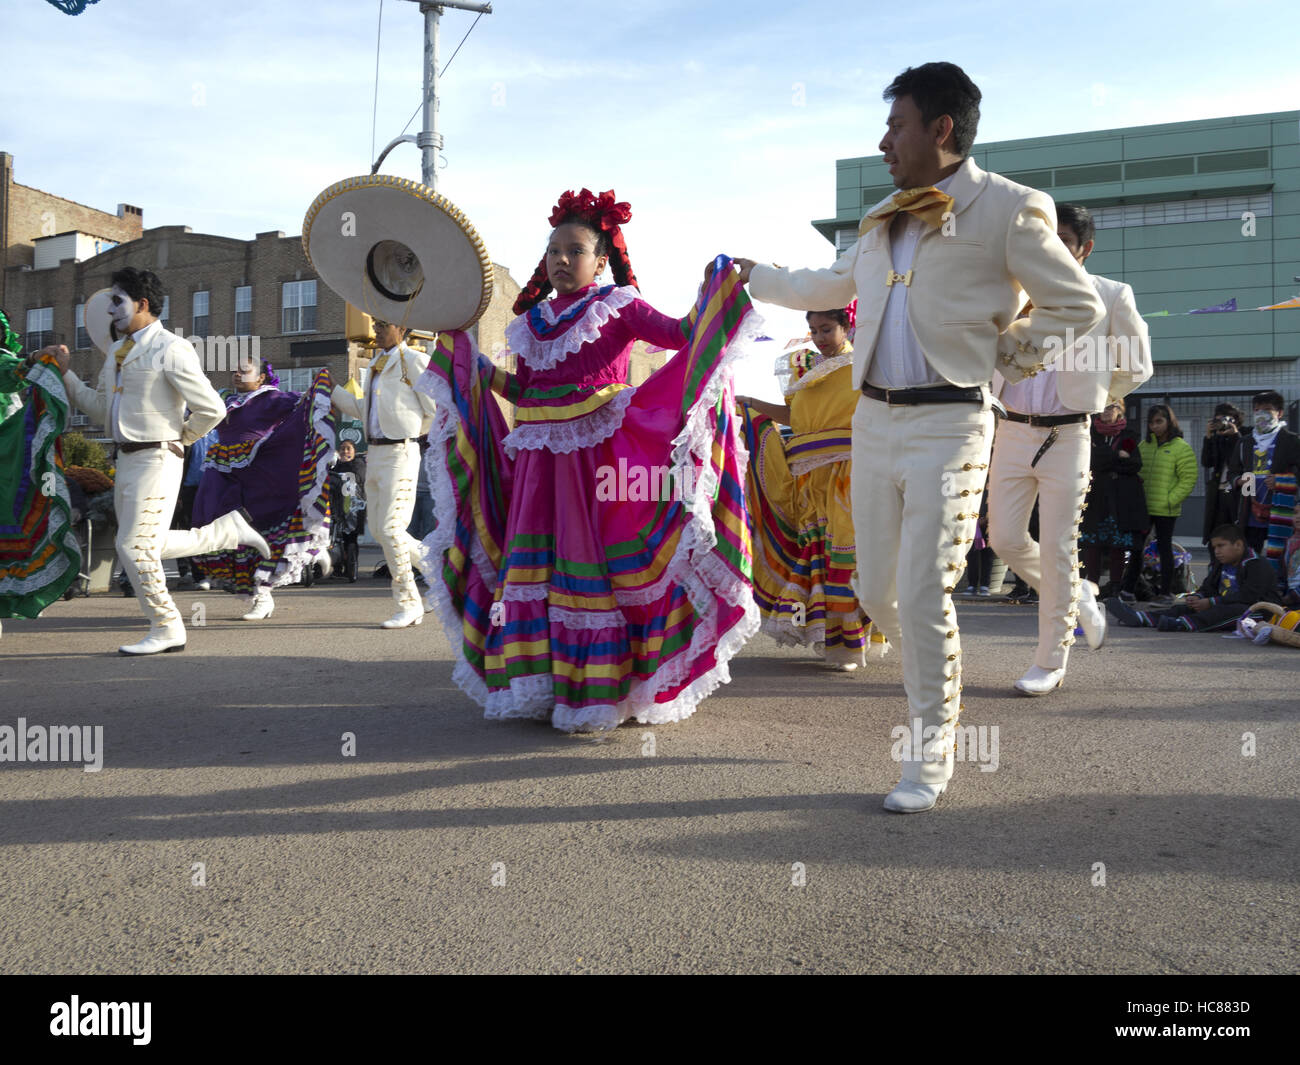 Mexican, folkloric dancers perform The Mexican Hat Dance at First Annual Day of the Dead Festival, Brooklyn, NY, Oct.30, 2016. Stock Photo